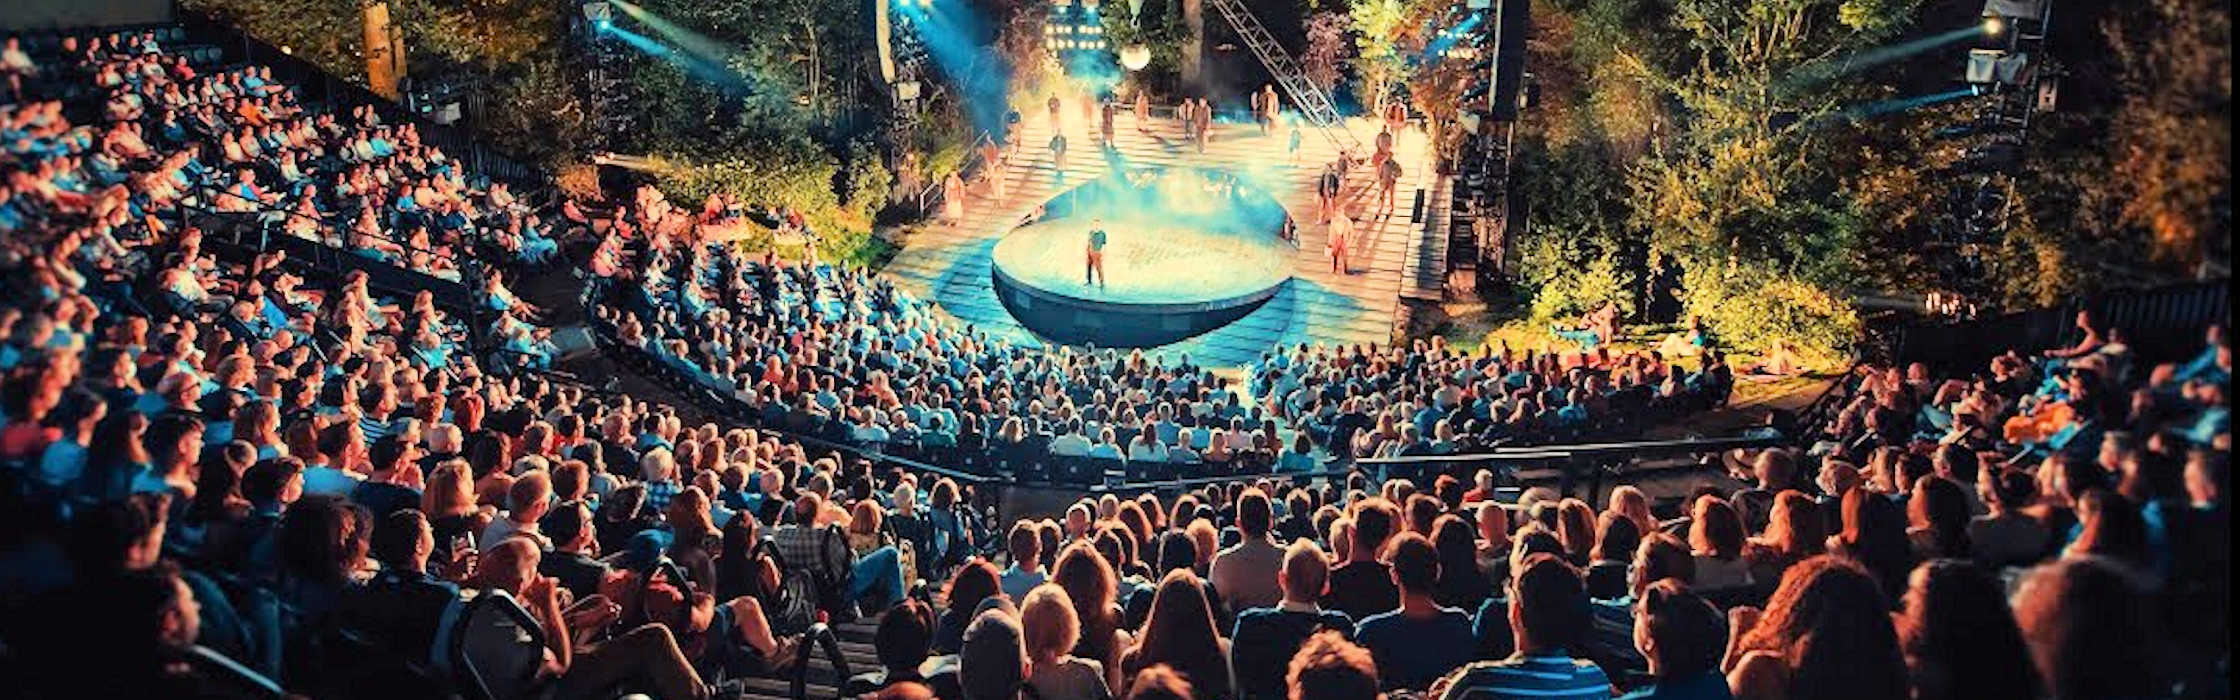 What's On at The Open Air Theatre, London